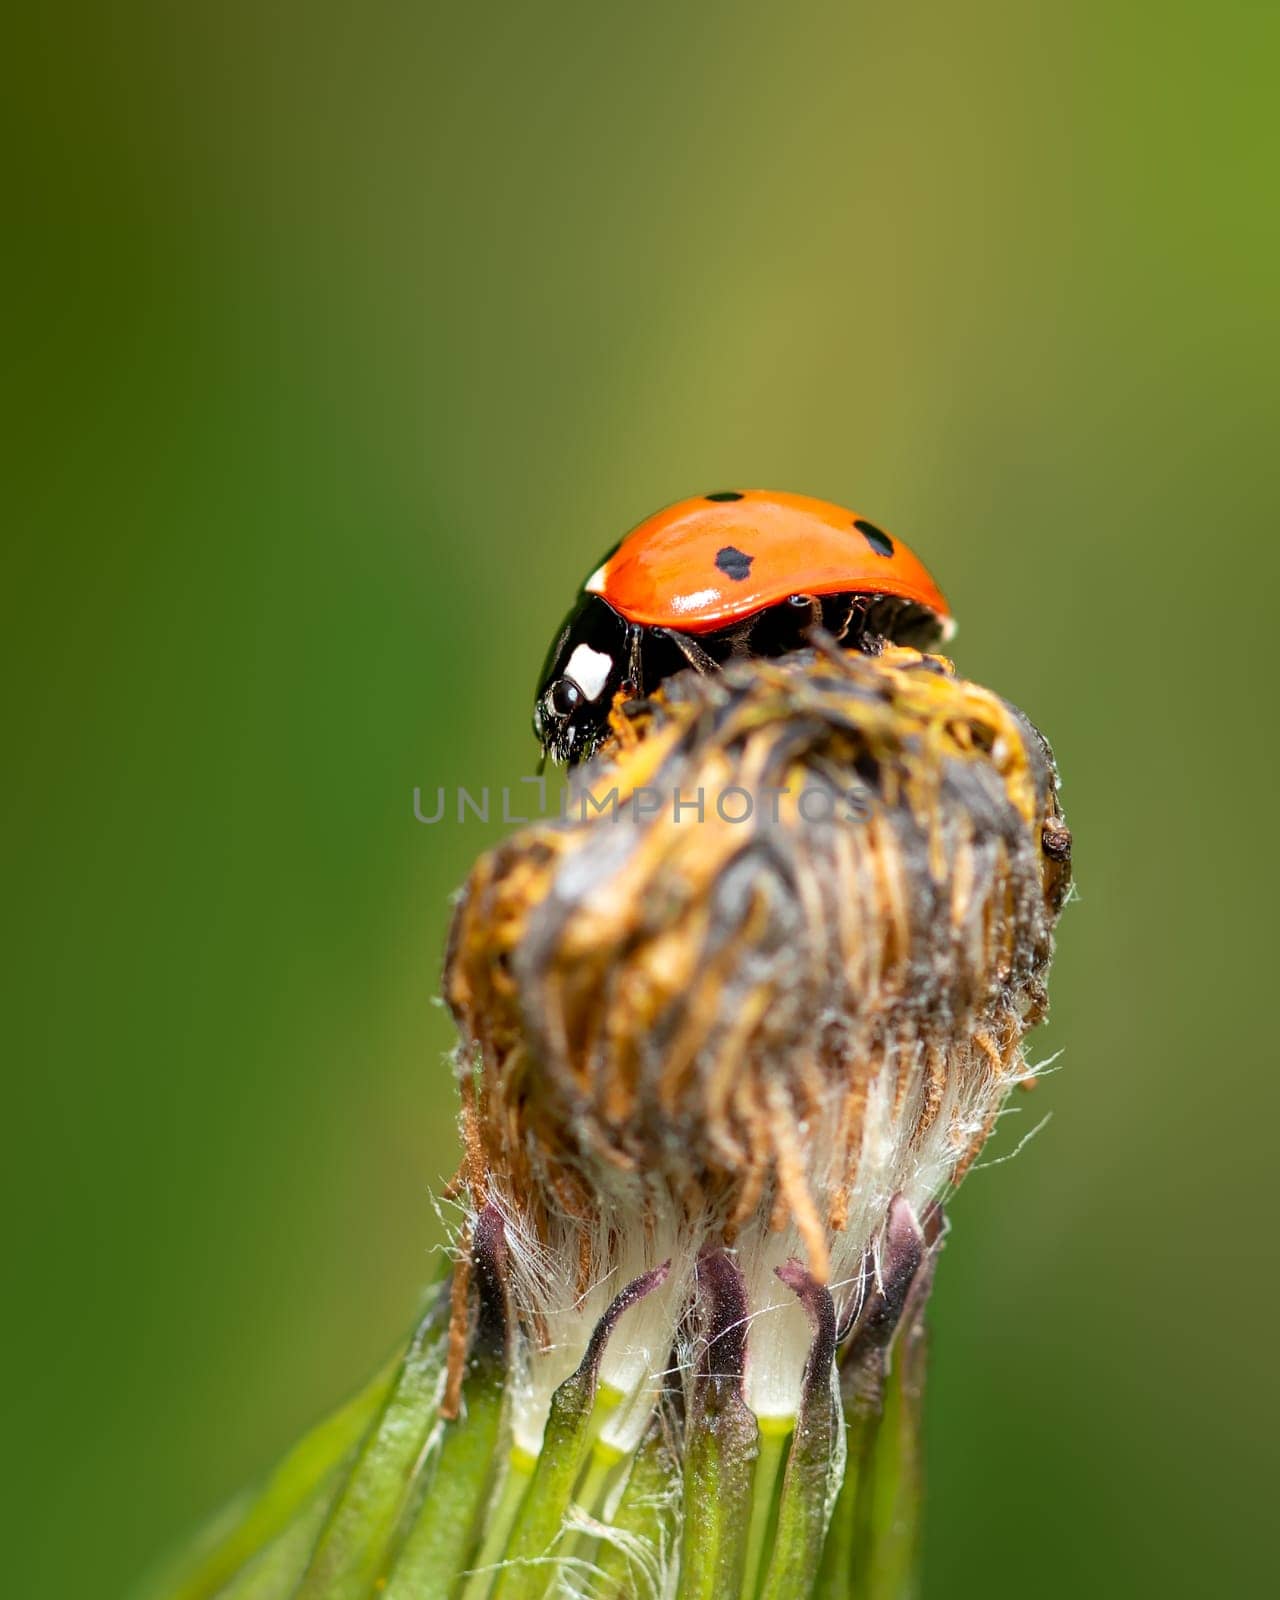 Red ladybug insect sitting on a flower bud, close-up photo of red Coccinellidae 